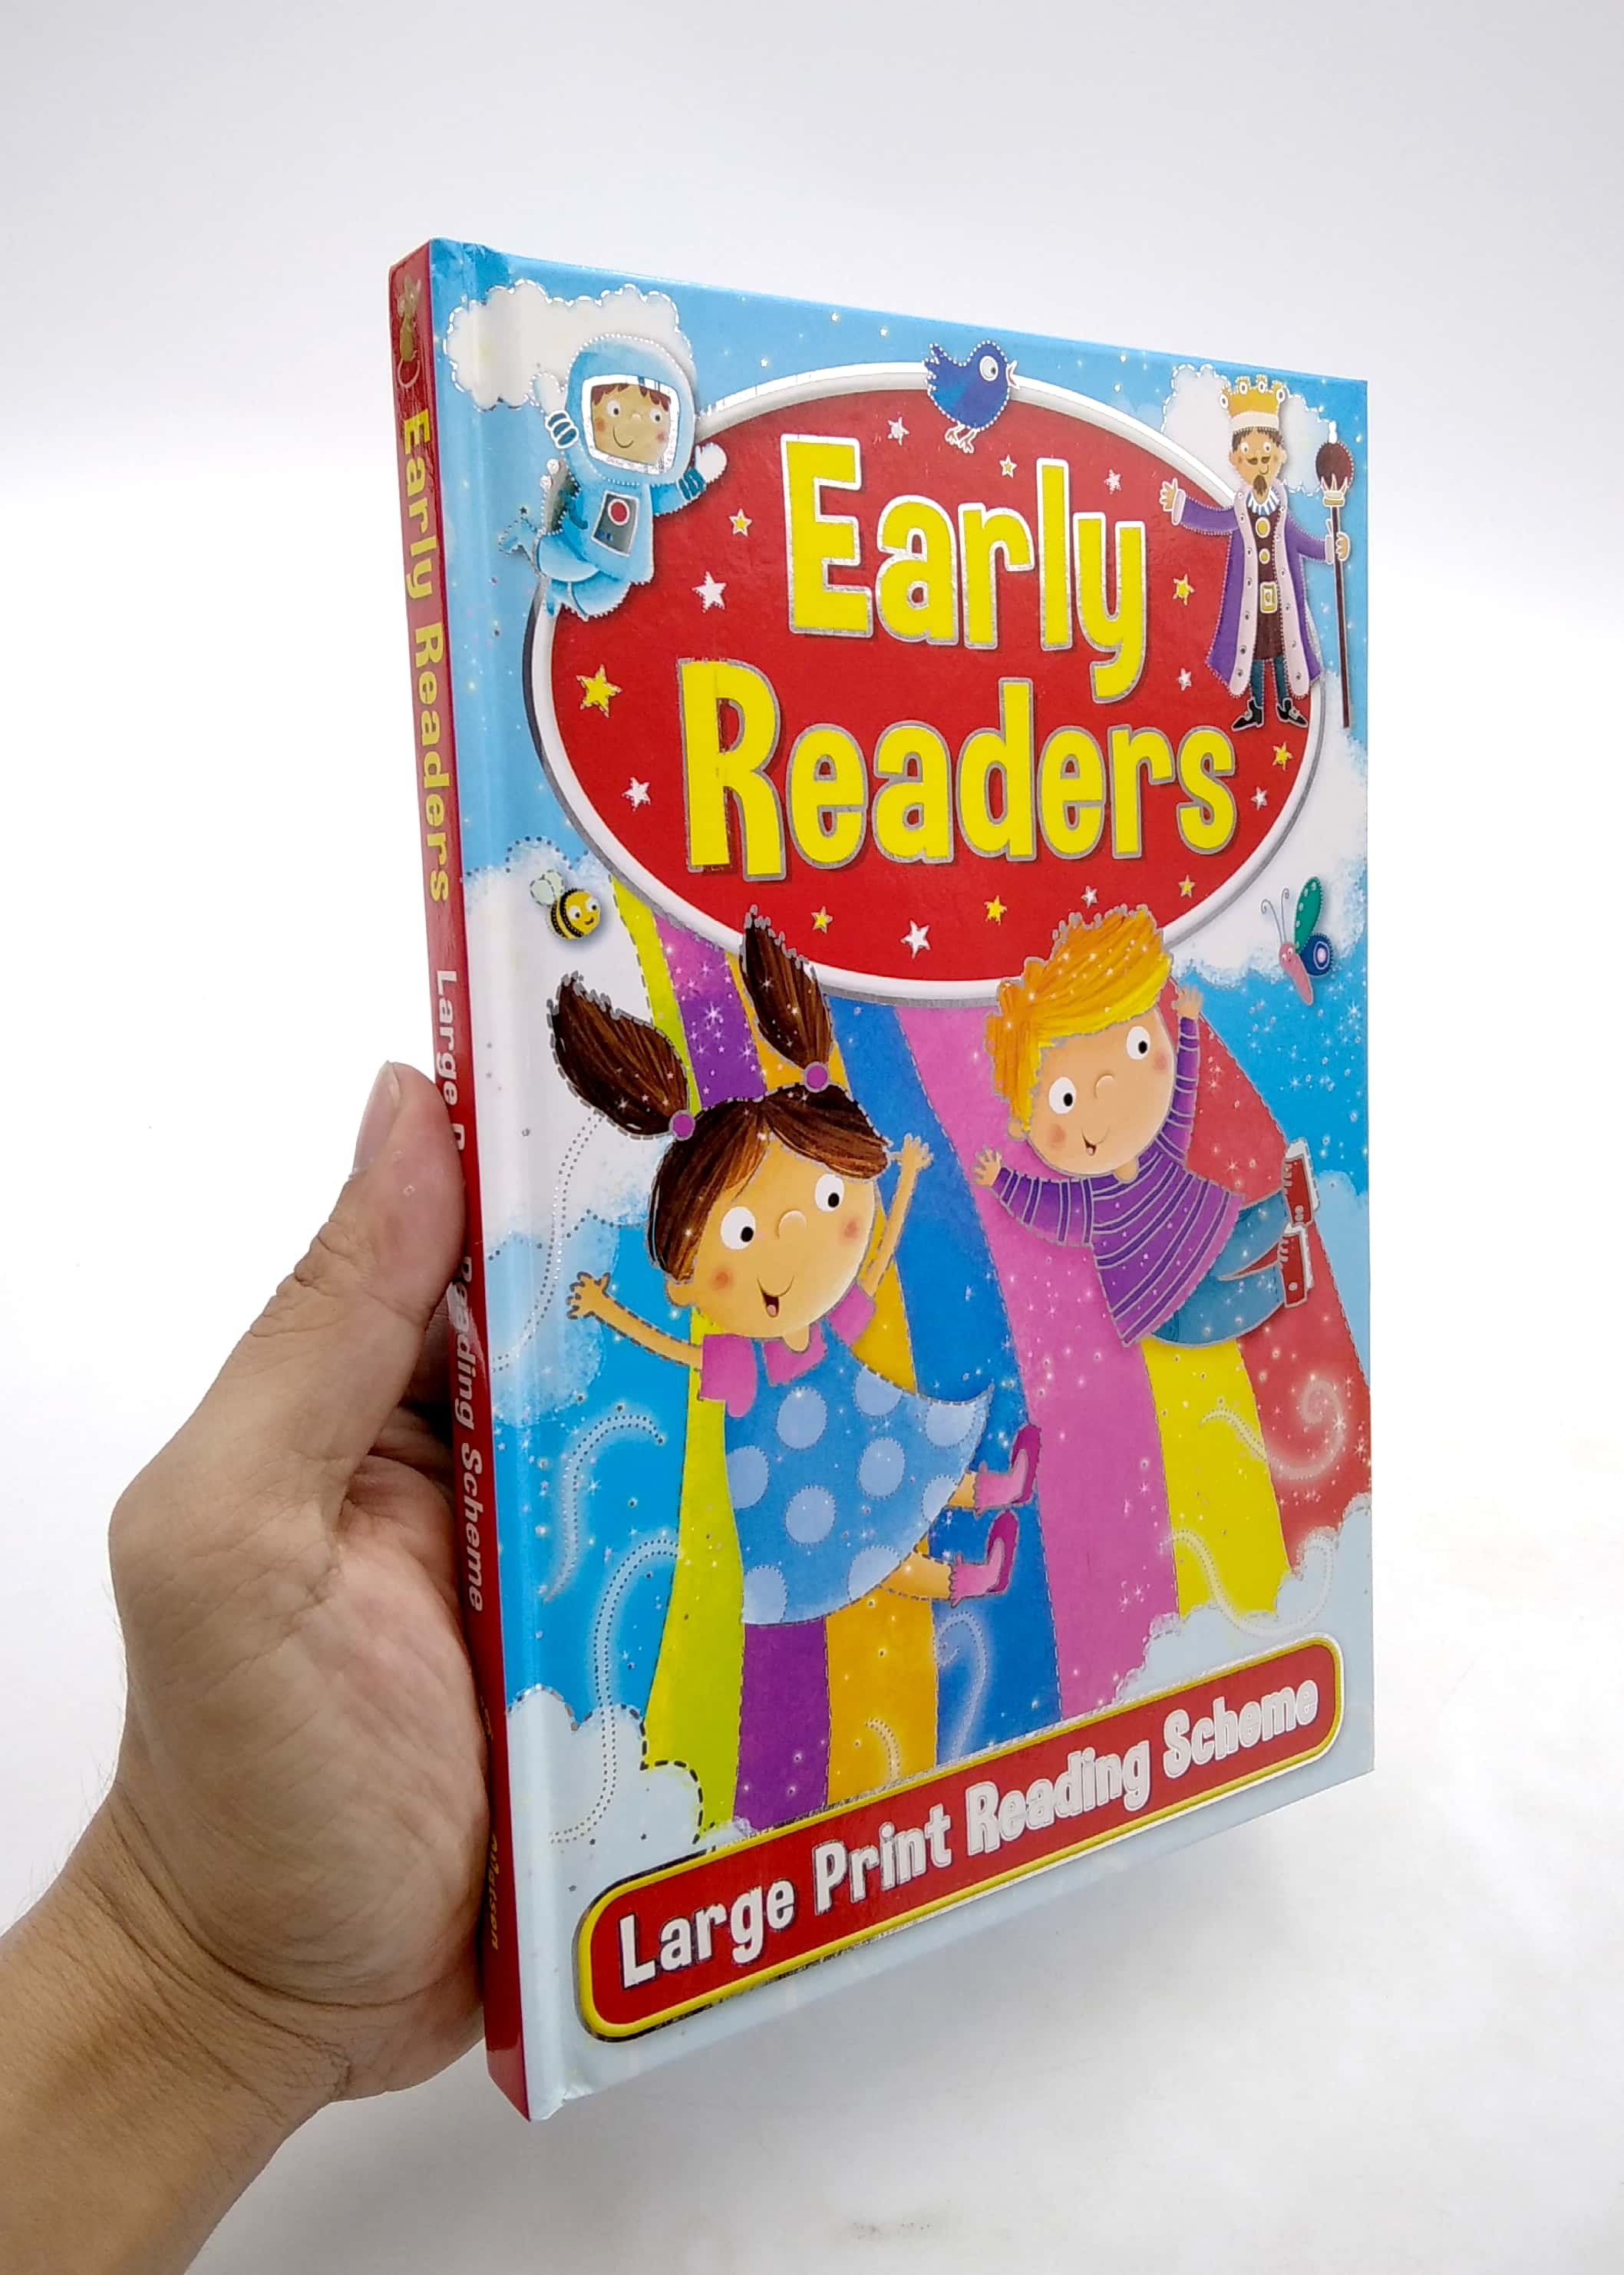 Early Readers: Large Print Reading Scheme